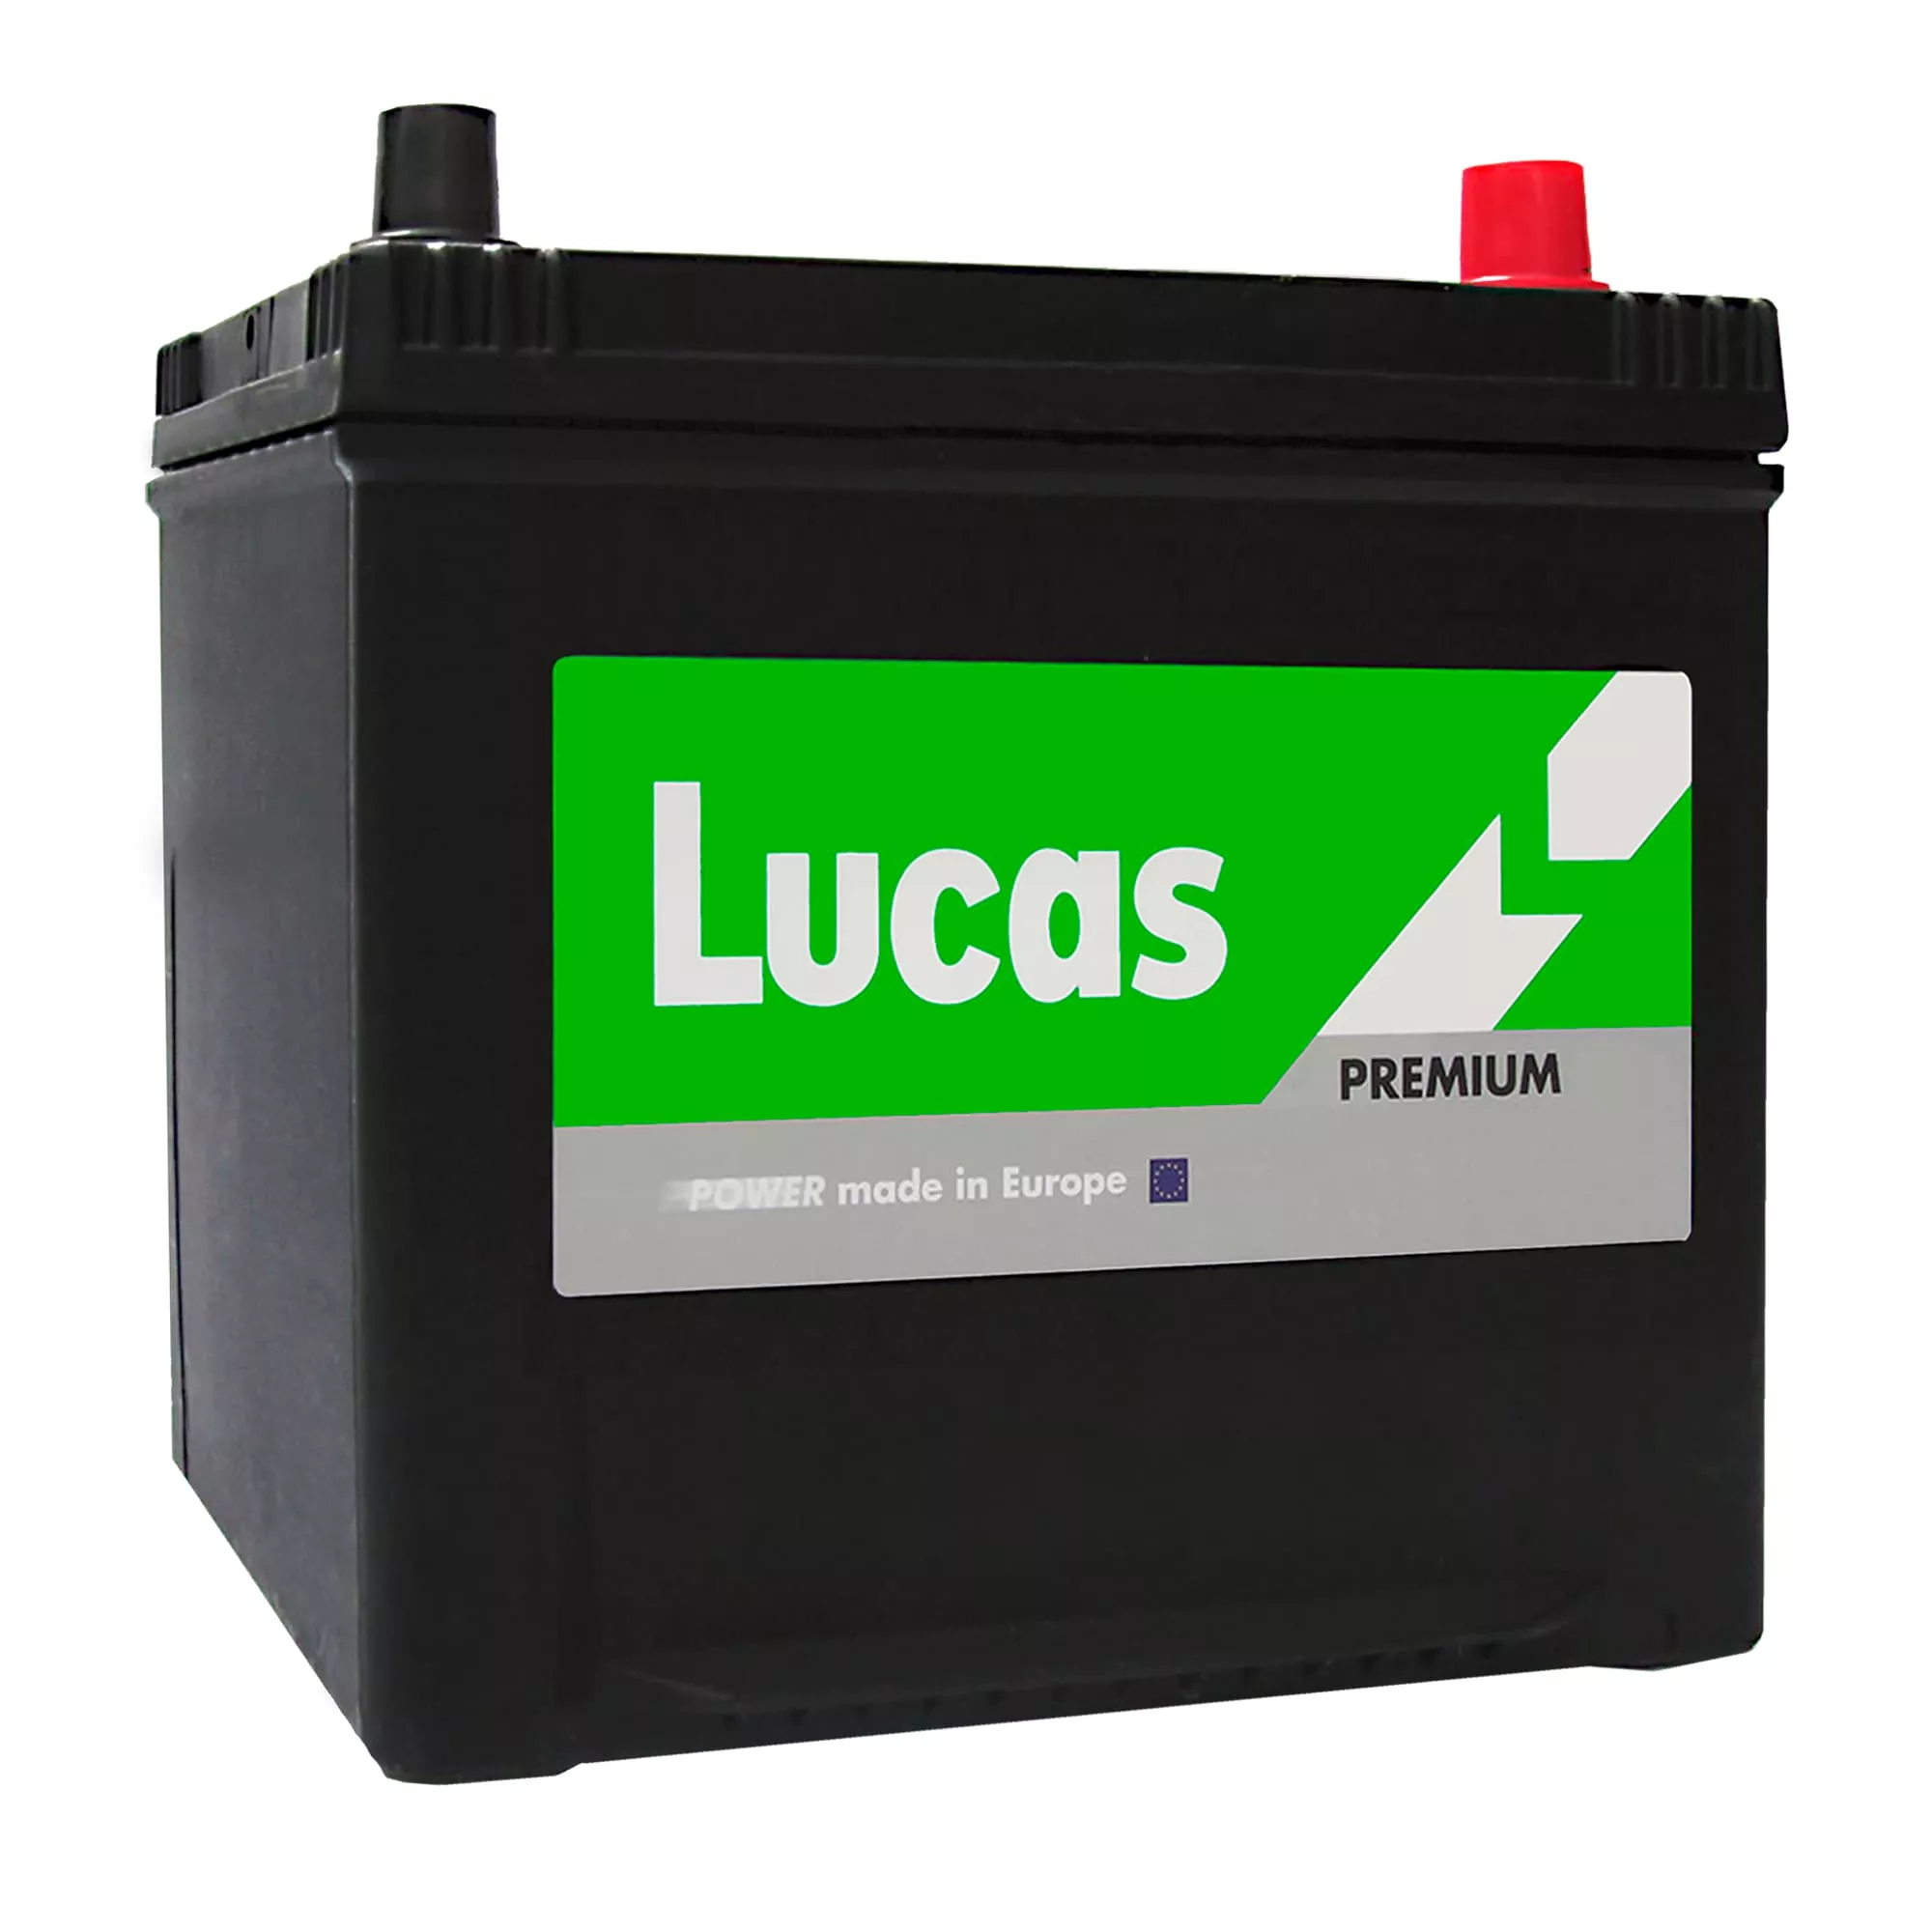 Аккумулятор Lucas (Batteries manufactured by Exide in Spain) 6CT-65 АзЕ Asia (LBPA654)